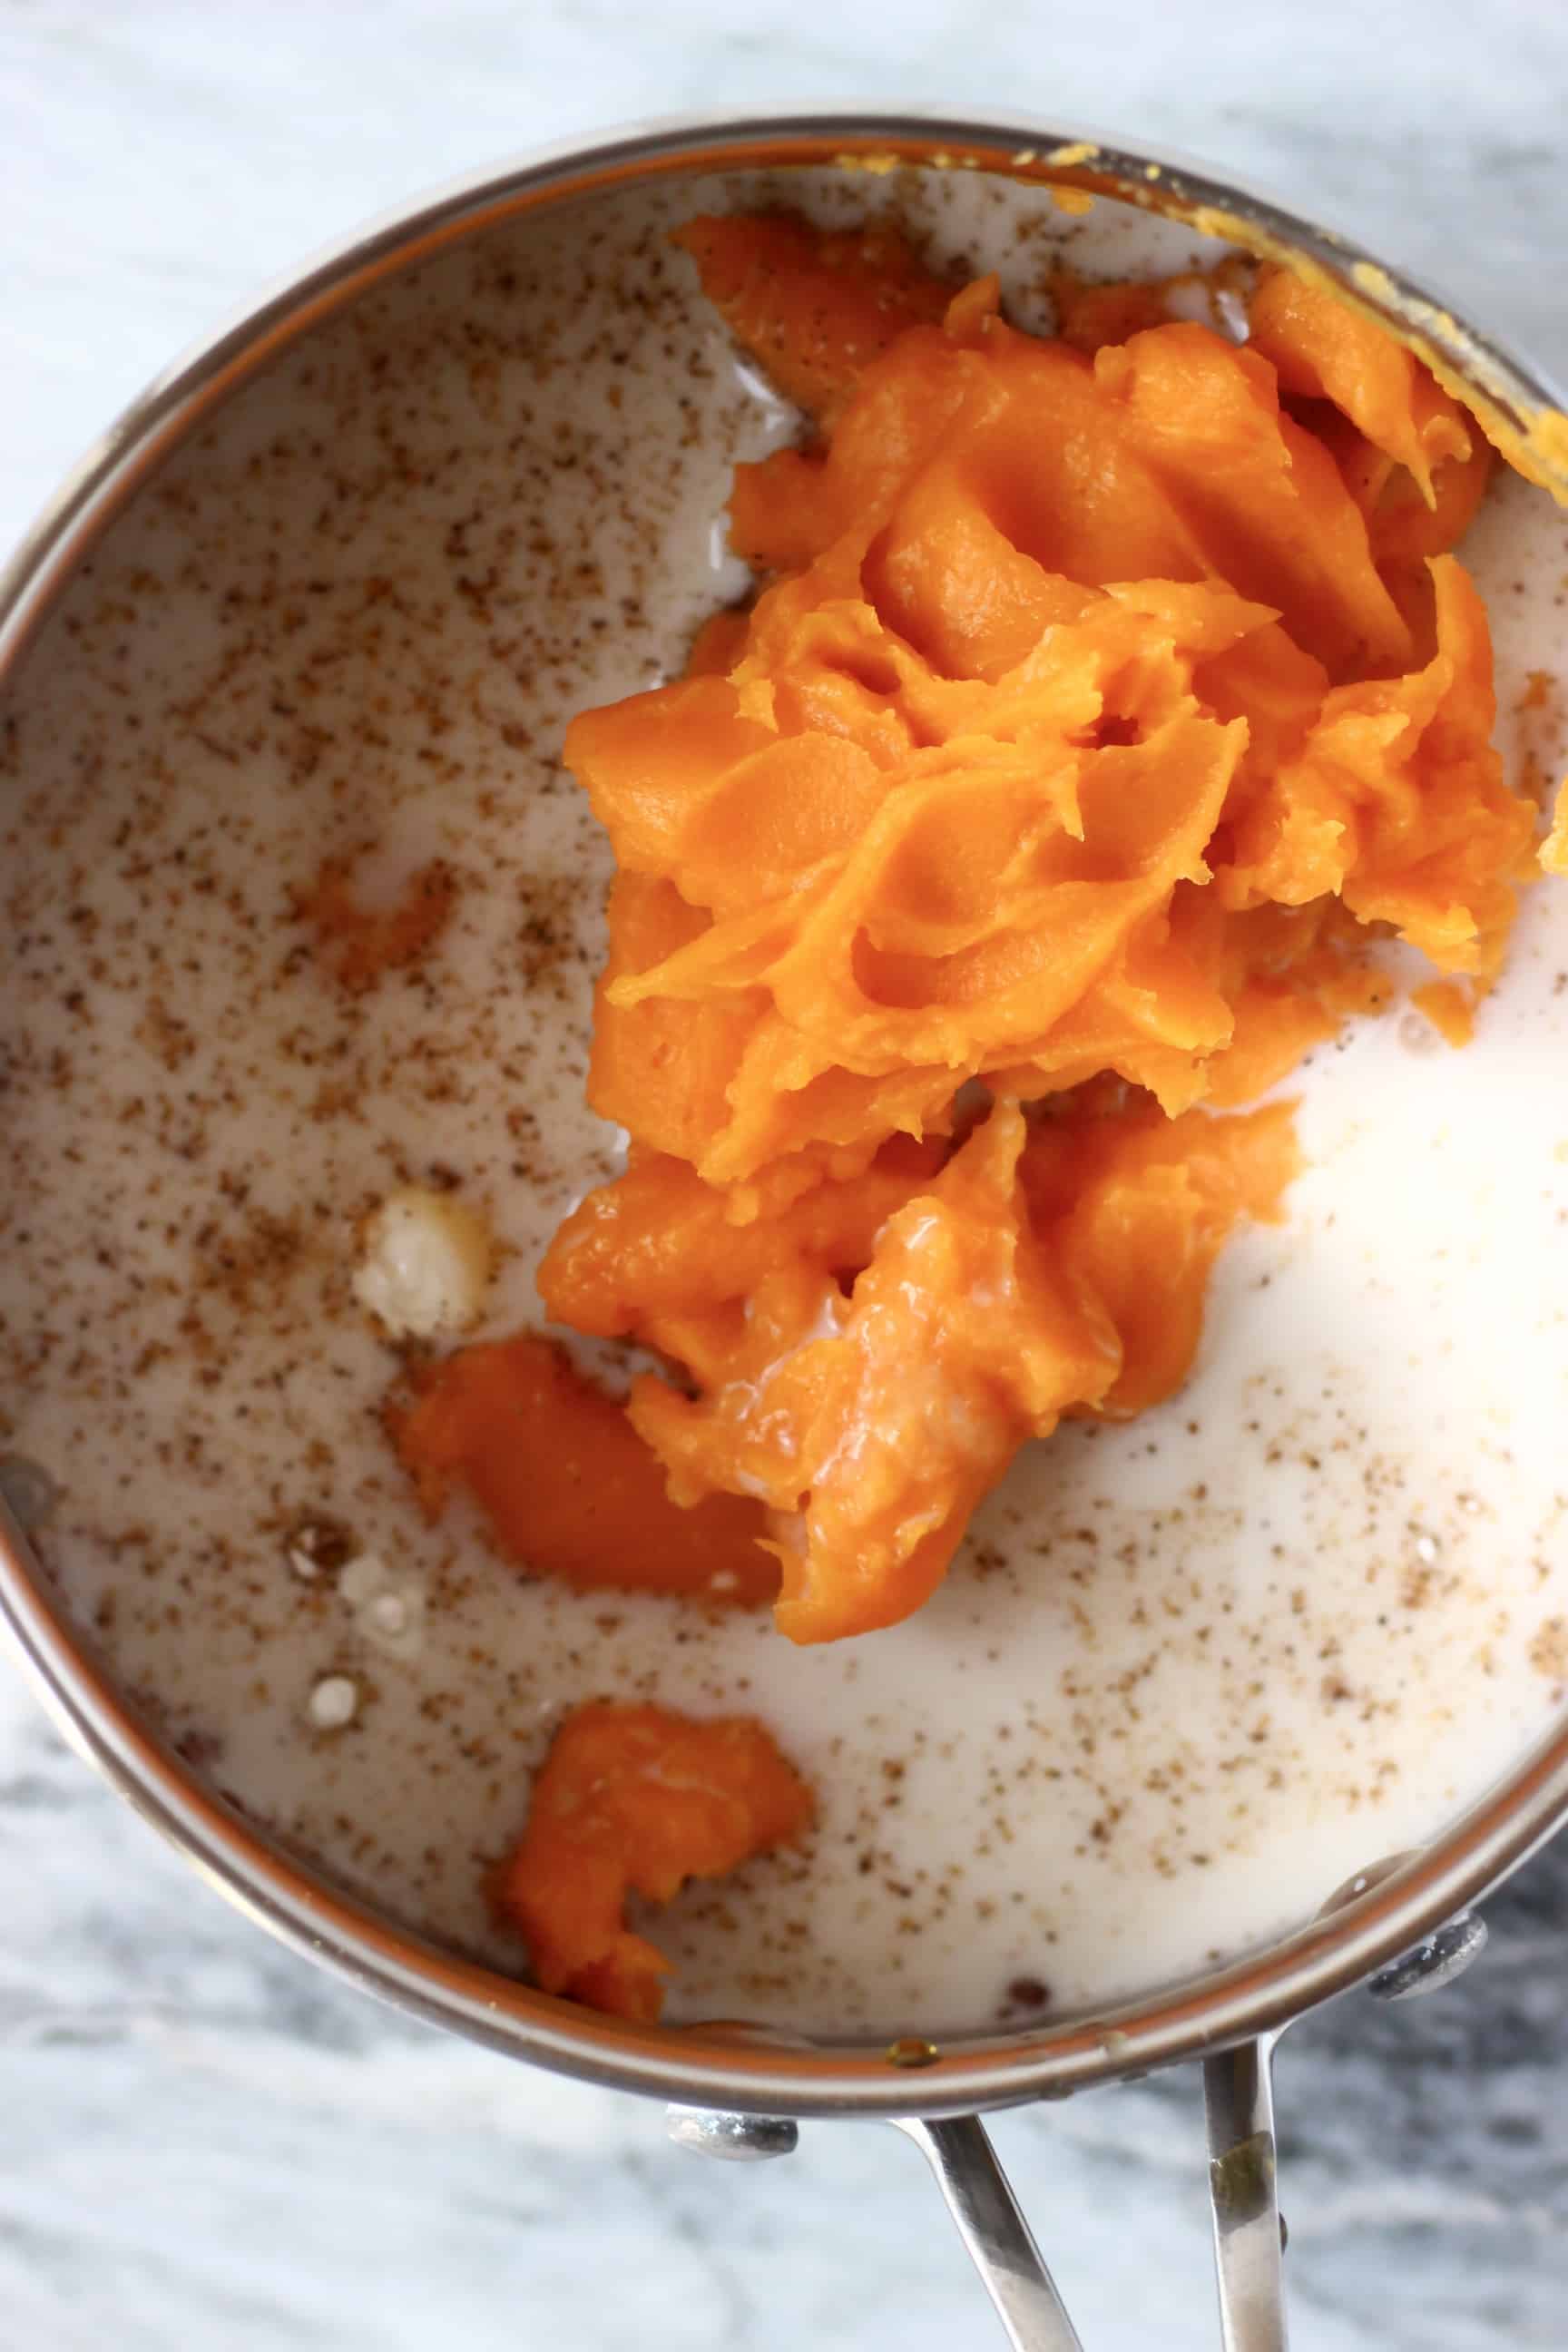 Sweet potato purée, milk and spices in a silver pan